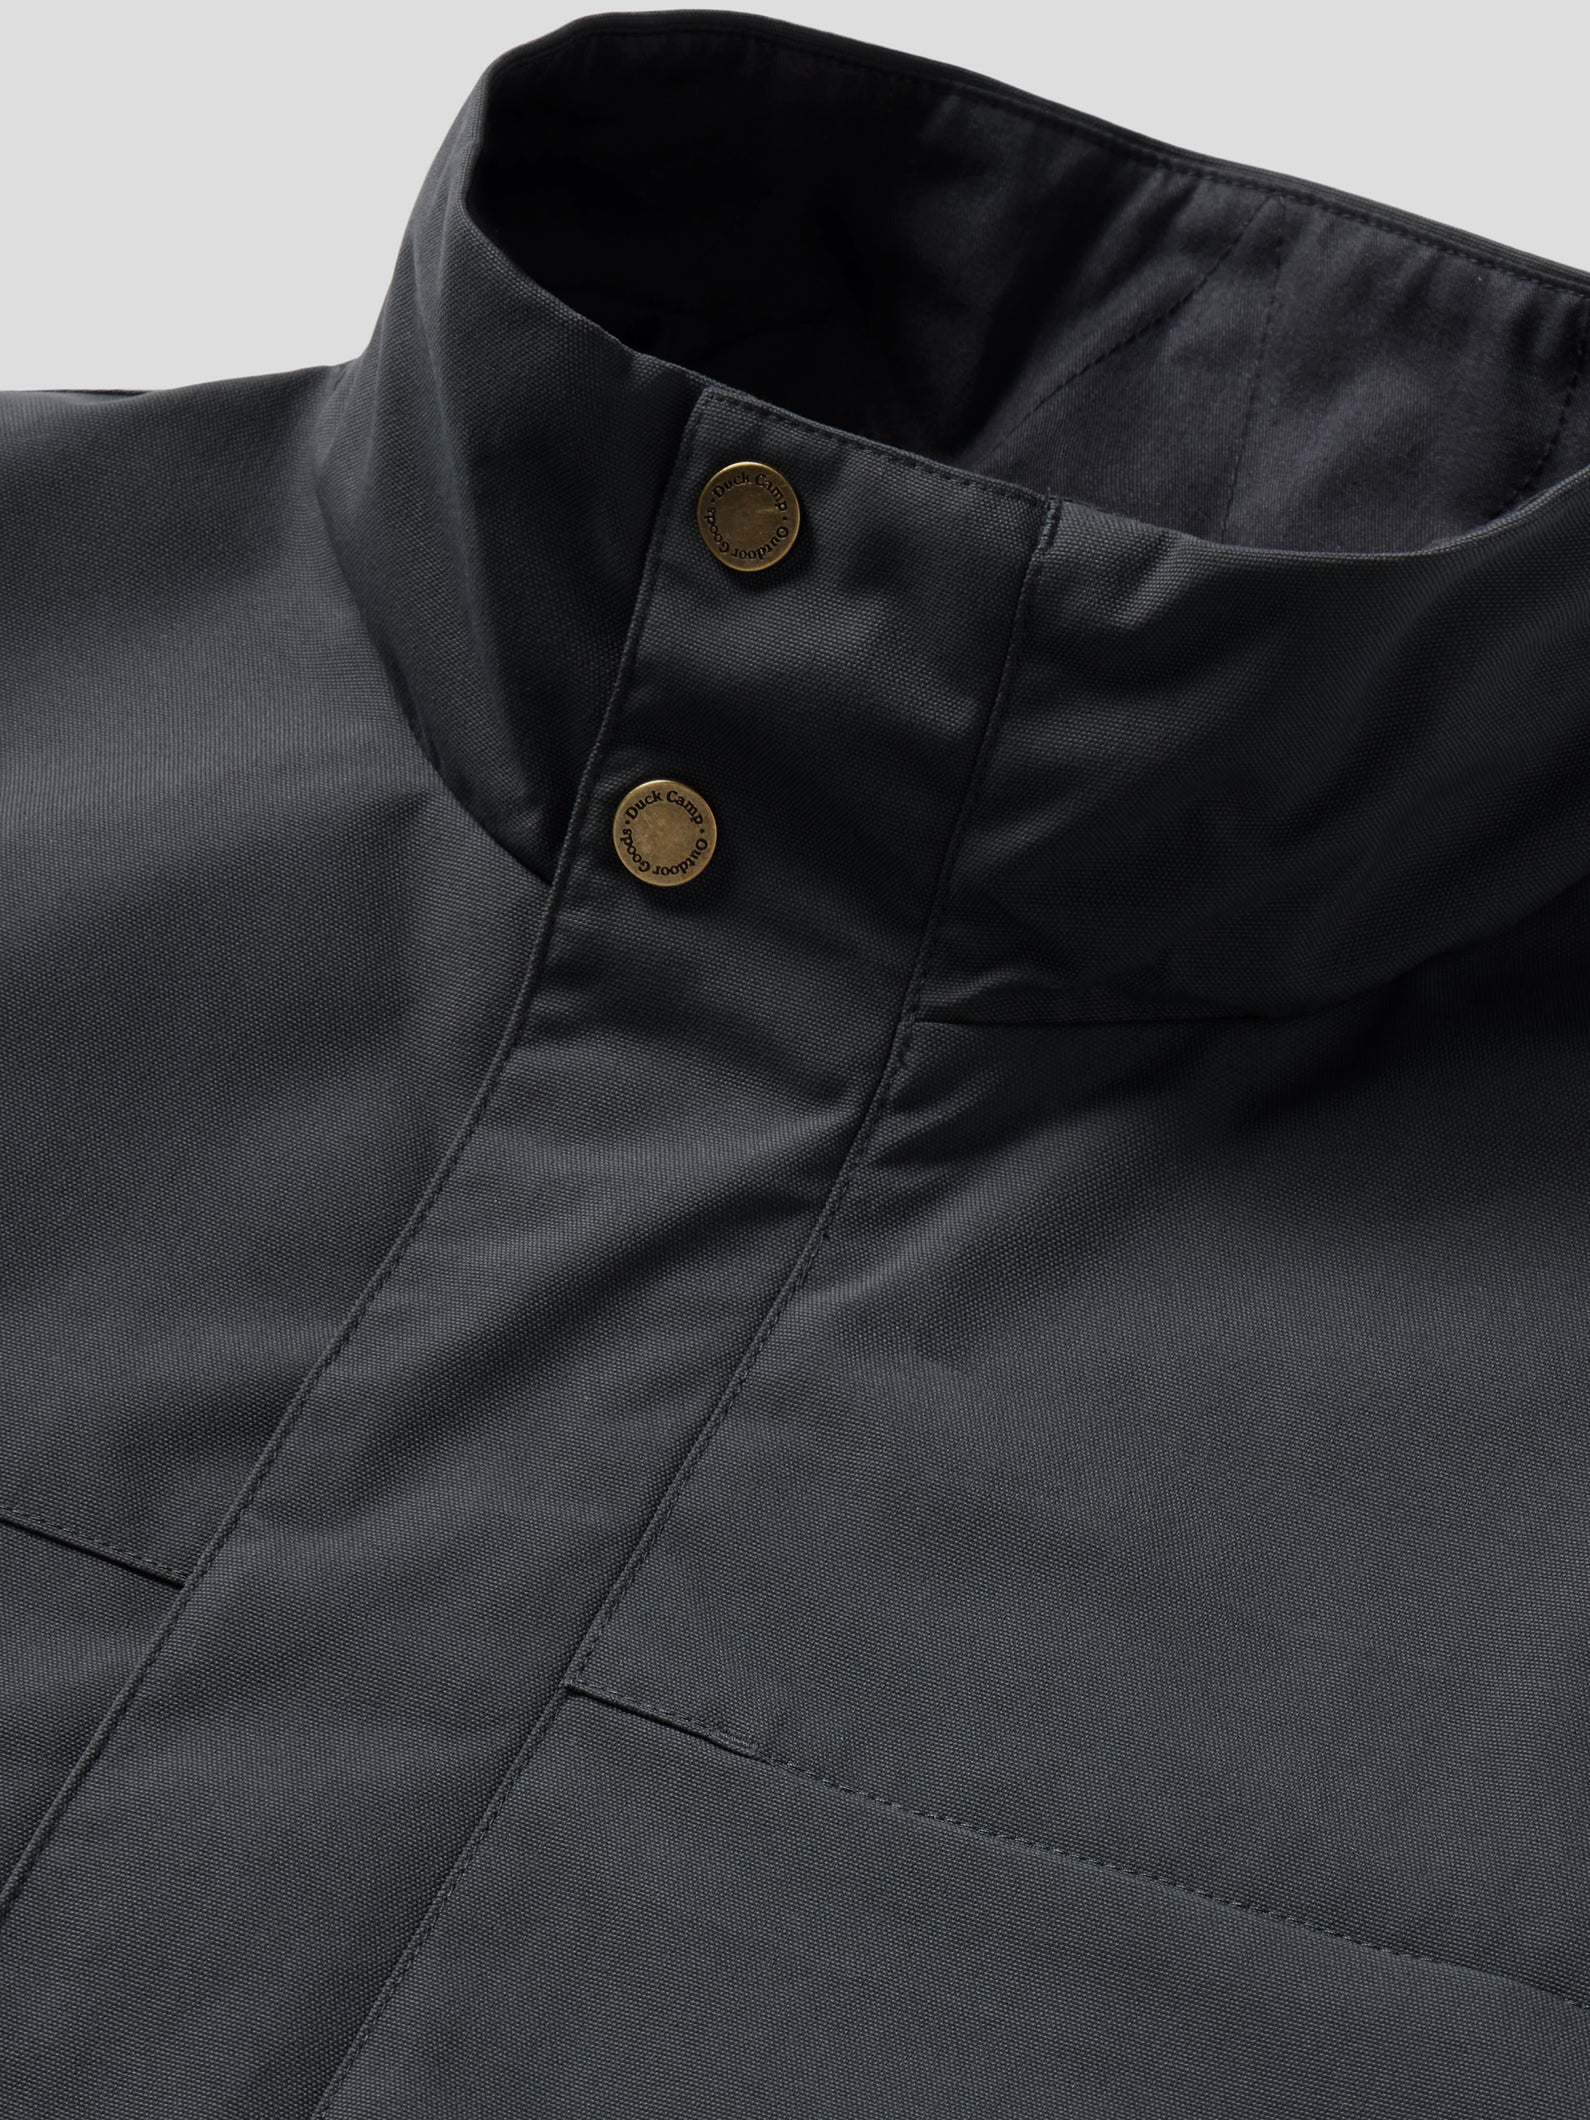 Austin Insulated Jacket - Charcoal